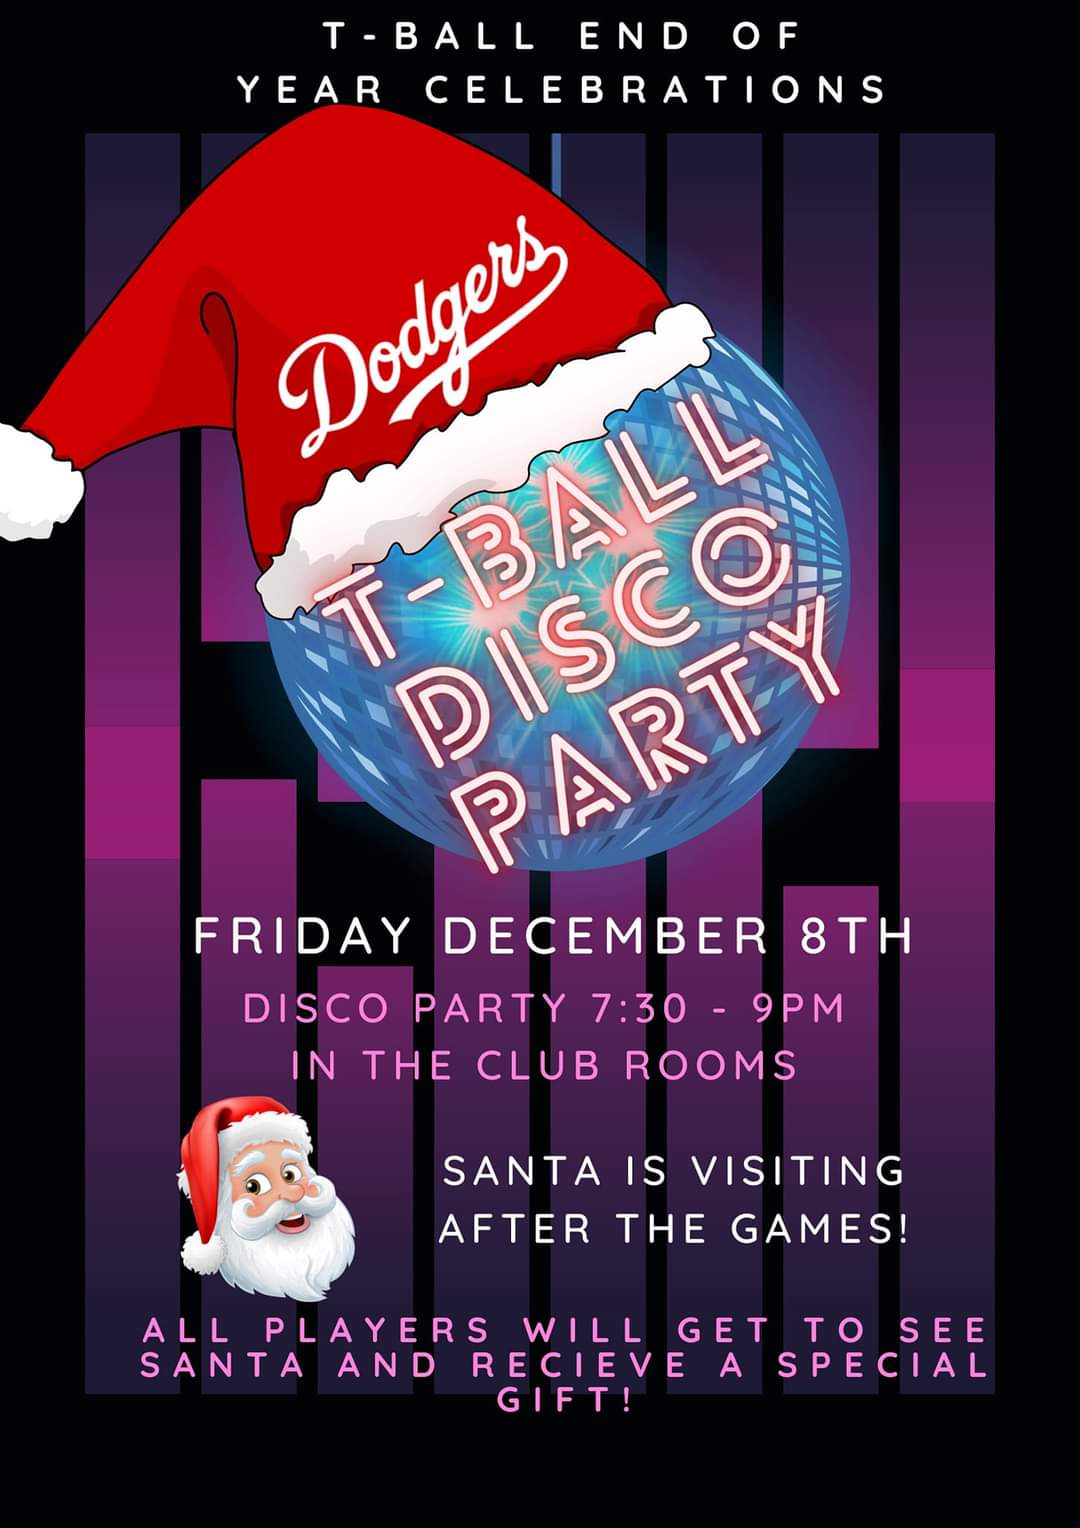 T-Ball Disco Party Flyer 2023